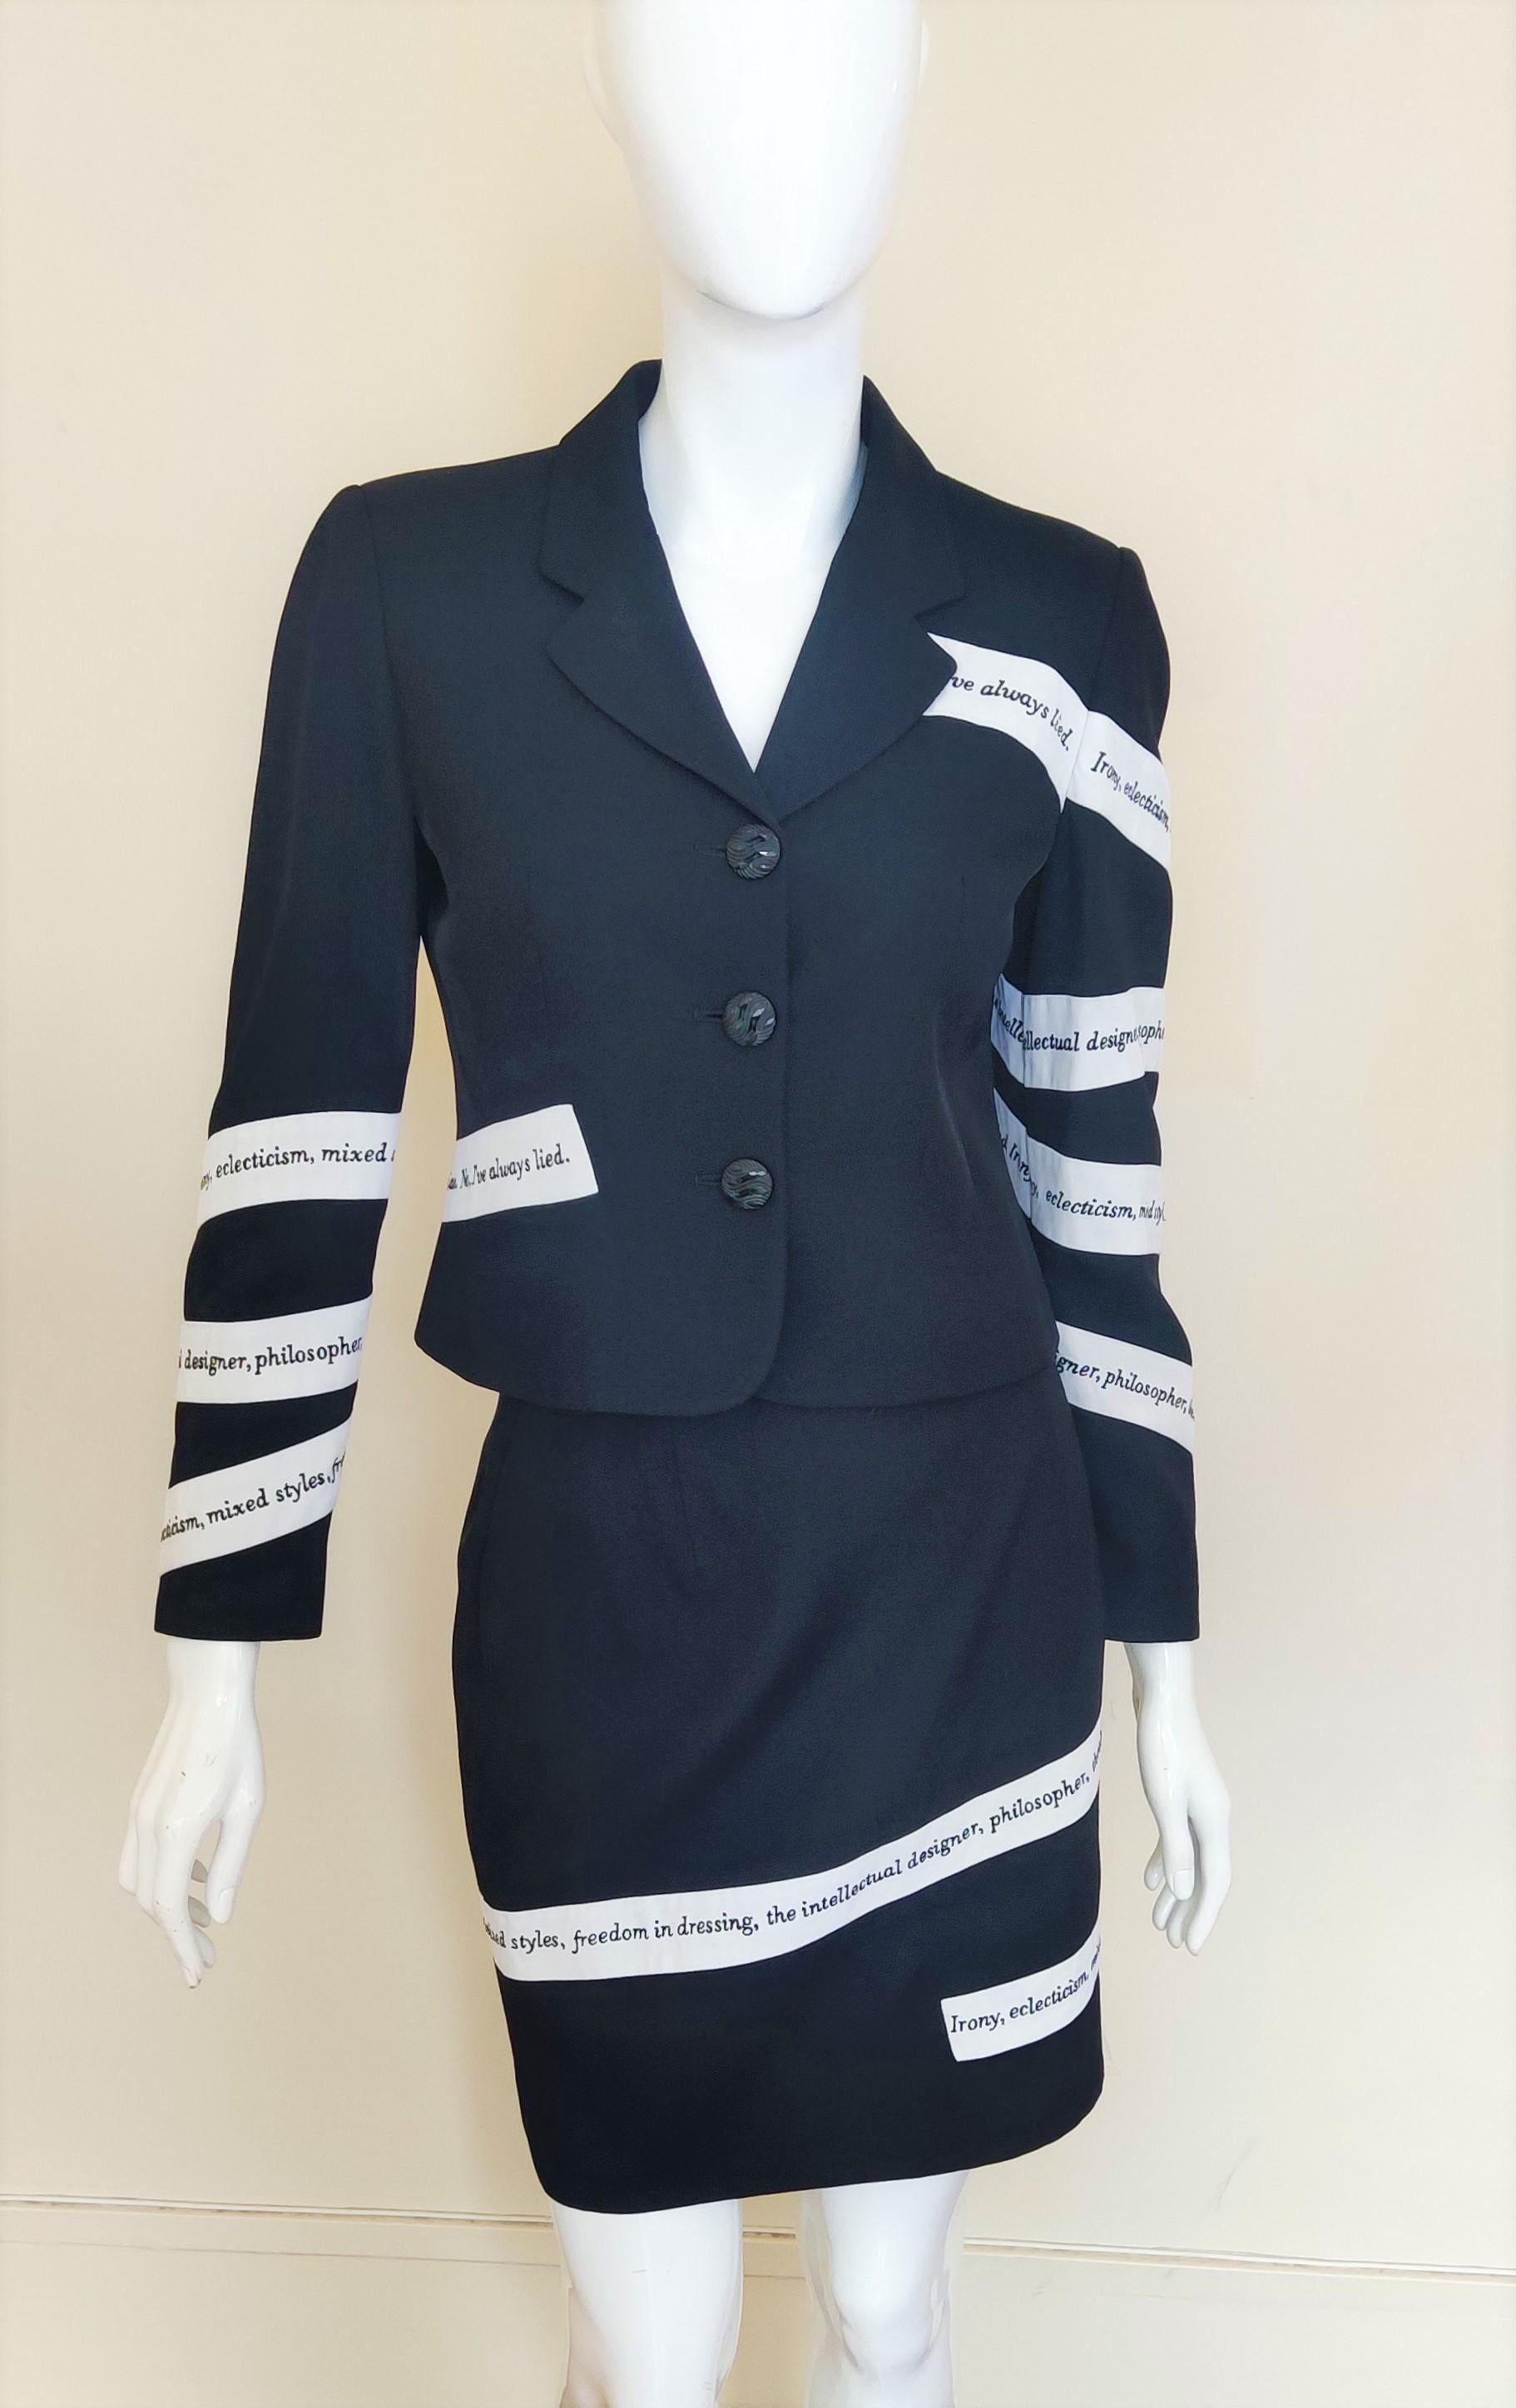 Noir Moschino Cheap and Chic Ironies Text Tape Vintage Couture Black White Dress Suit en vente